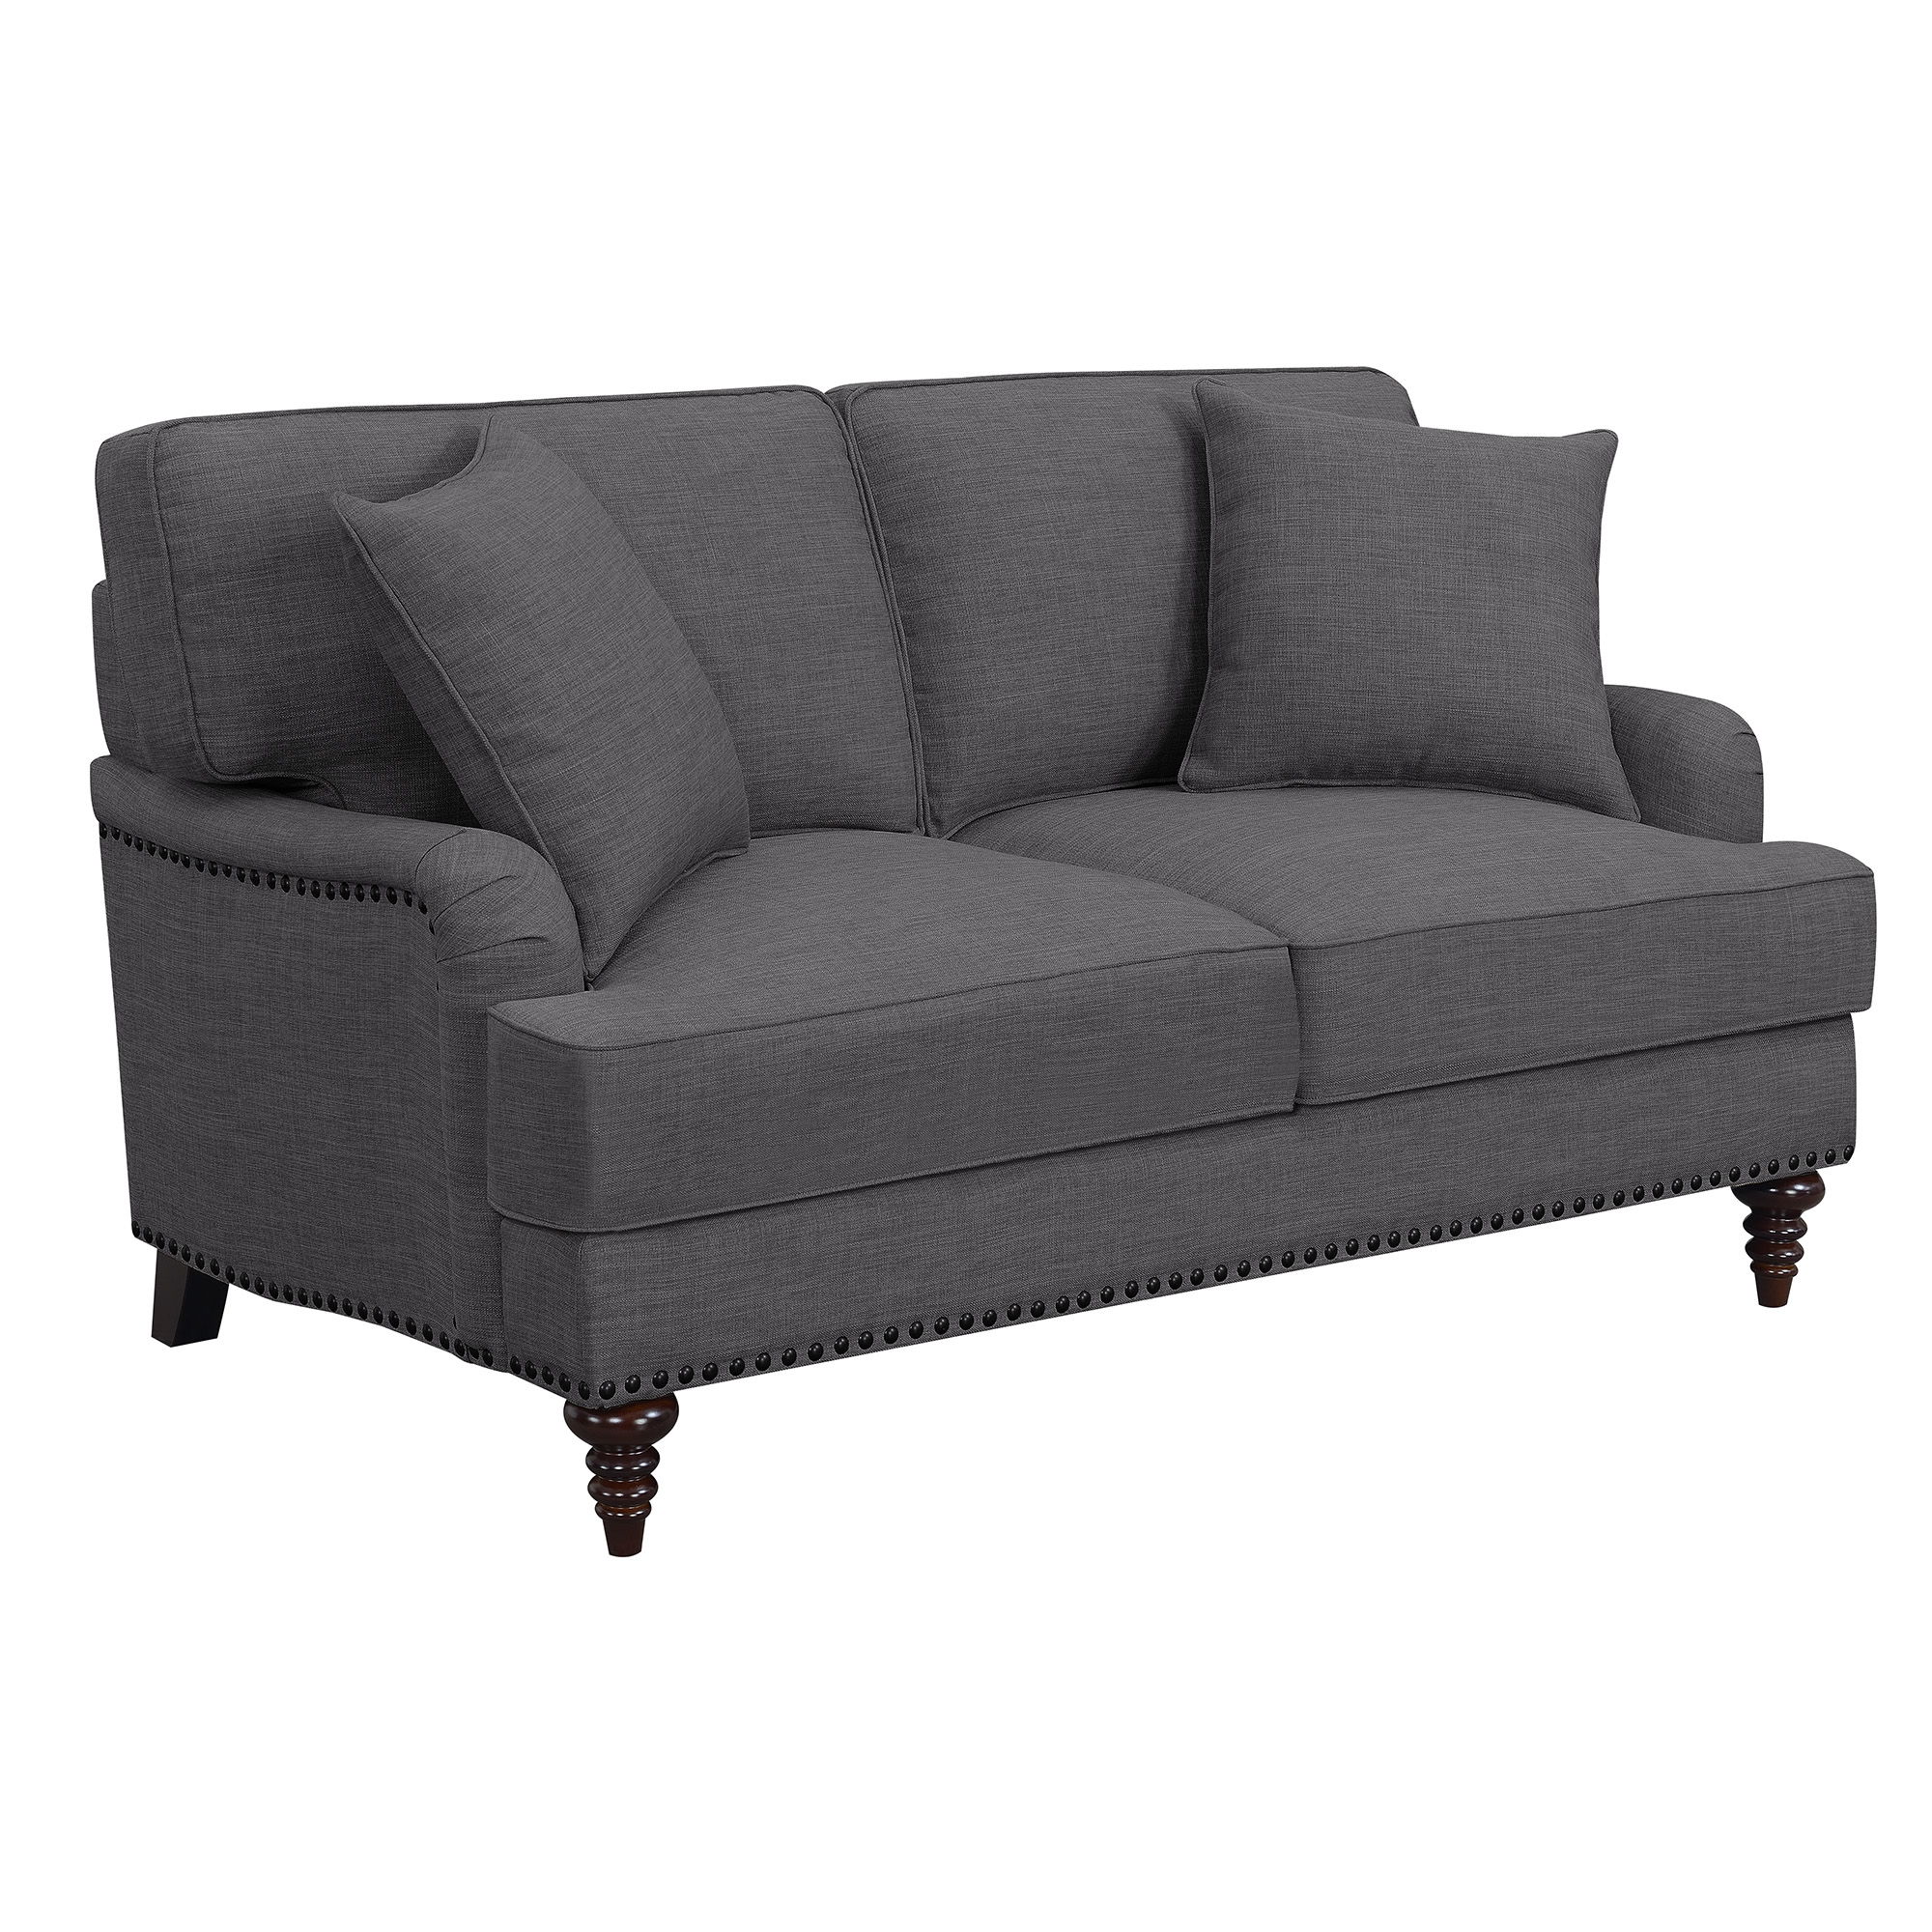 Abby Loveseat W/Pillows in Heirloom Charcoal